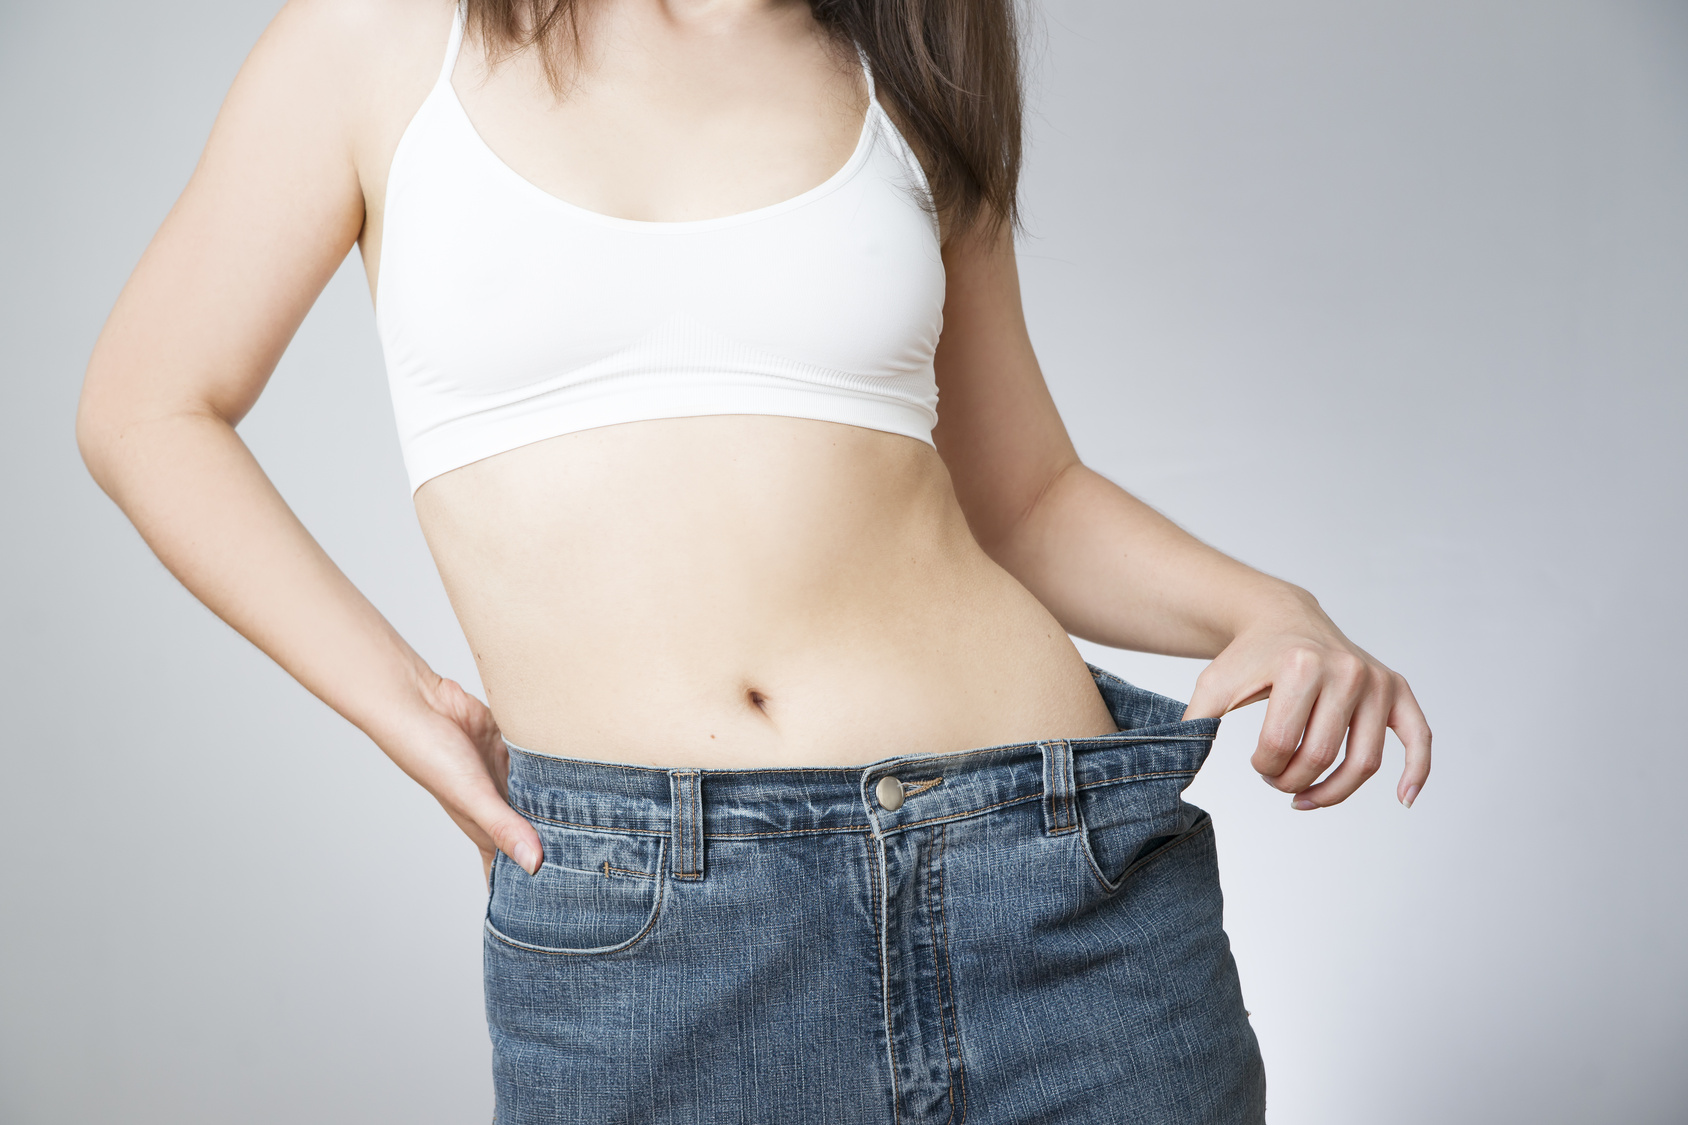 Young woman in jeans of large size, concept of weight loss